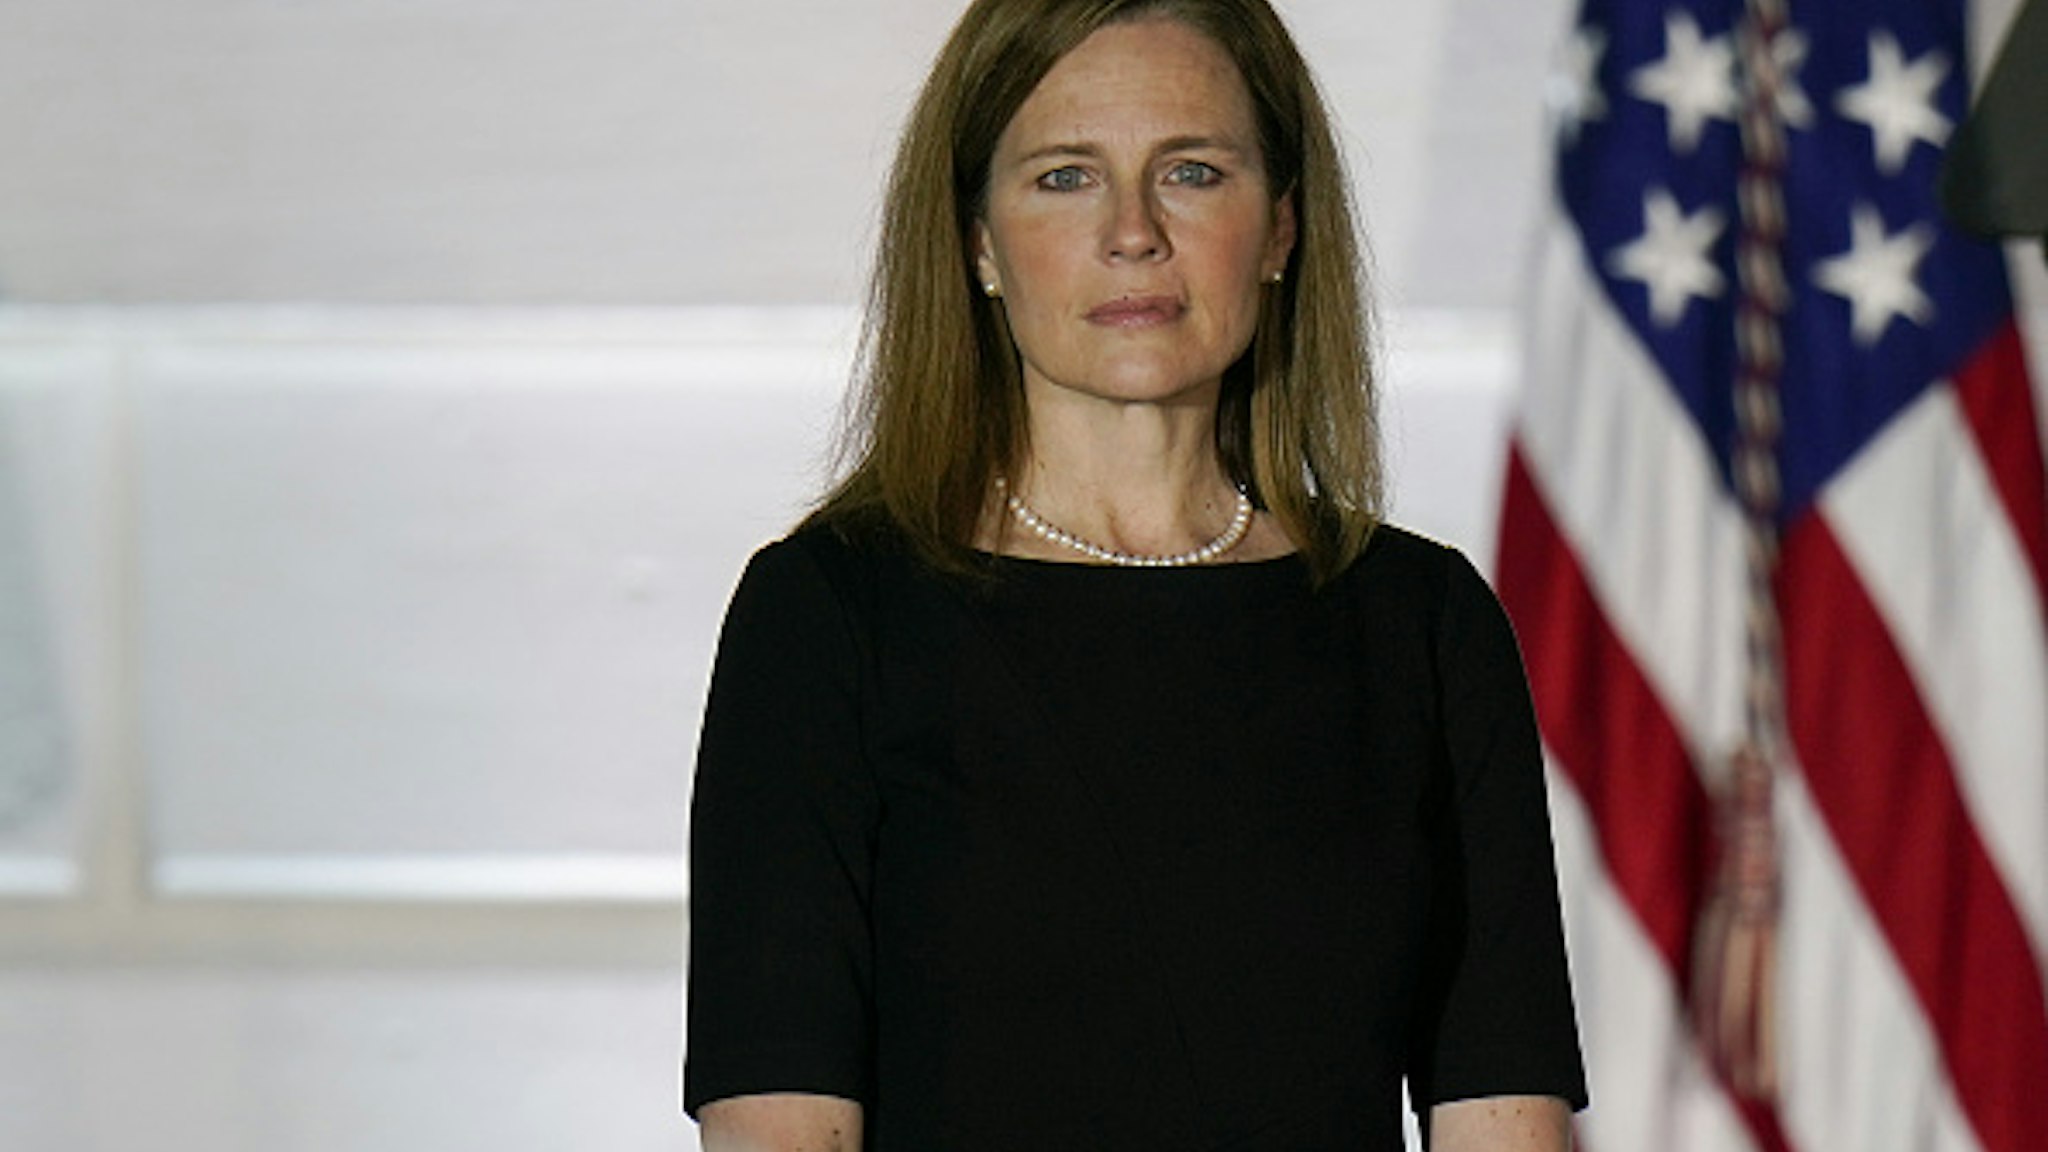 Amy Coney Barrett, associate justice of the U.S. Supreme Court, stands during a ceremony on the South Lawn of the White House in Washington, D.C., U.S., on Monday, Oct. 26, 2020. The Senate voted 52-48 Monday to confirm Barrett to the Supreme Court, giving the court a 6-3 conservative majority that could determine the future of the Affordable Care Act and abortion rights.